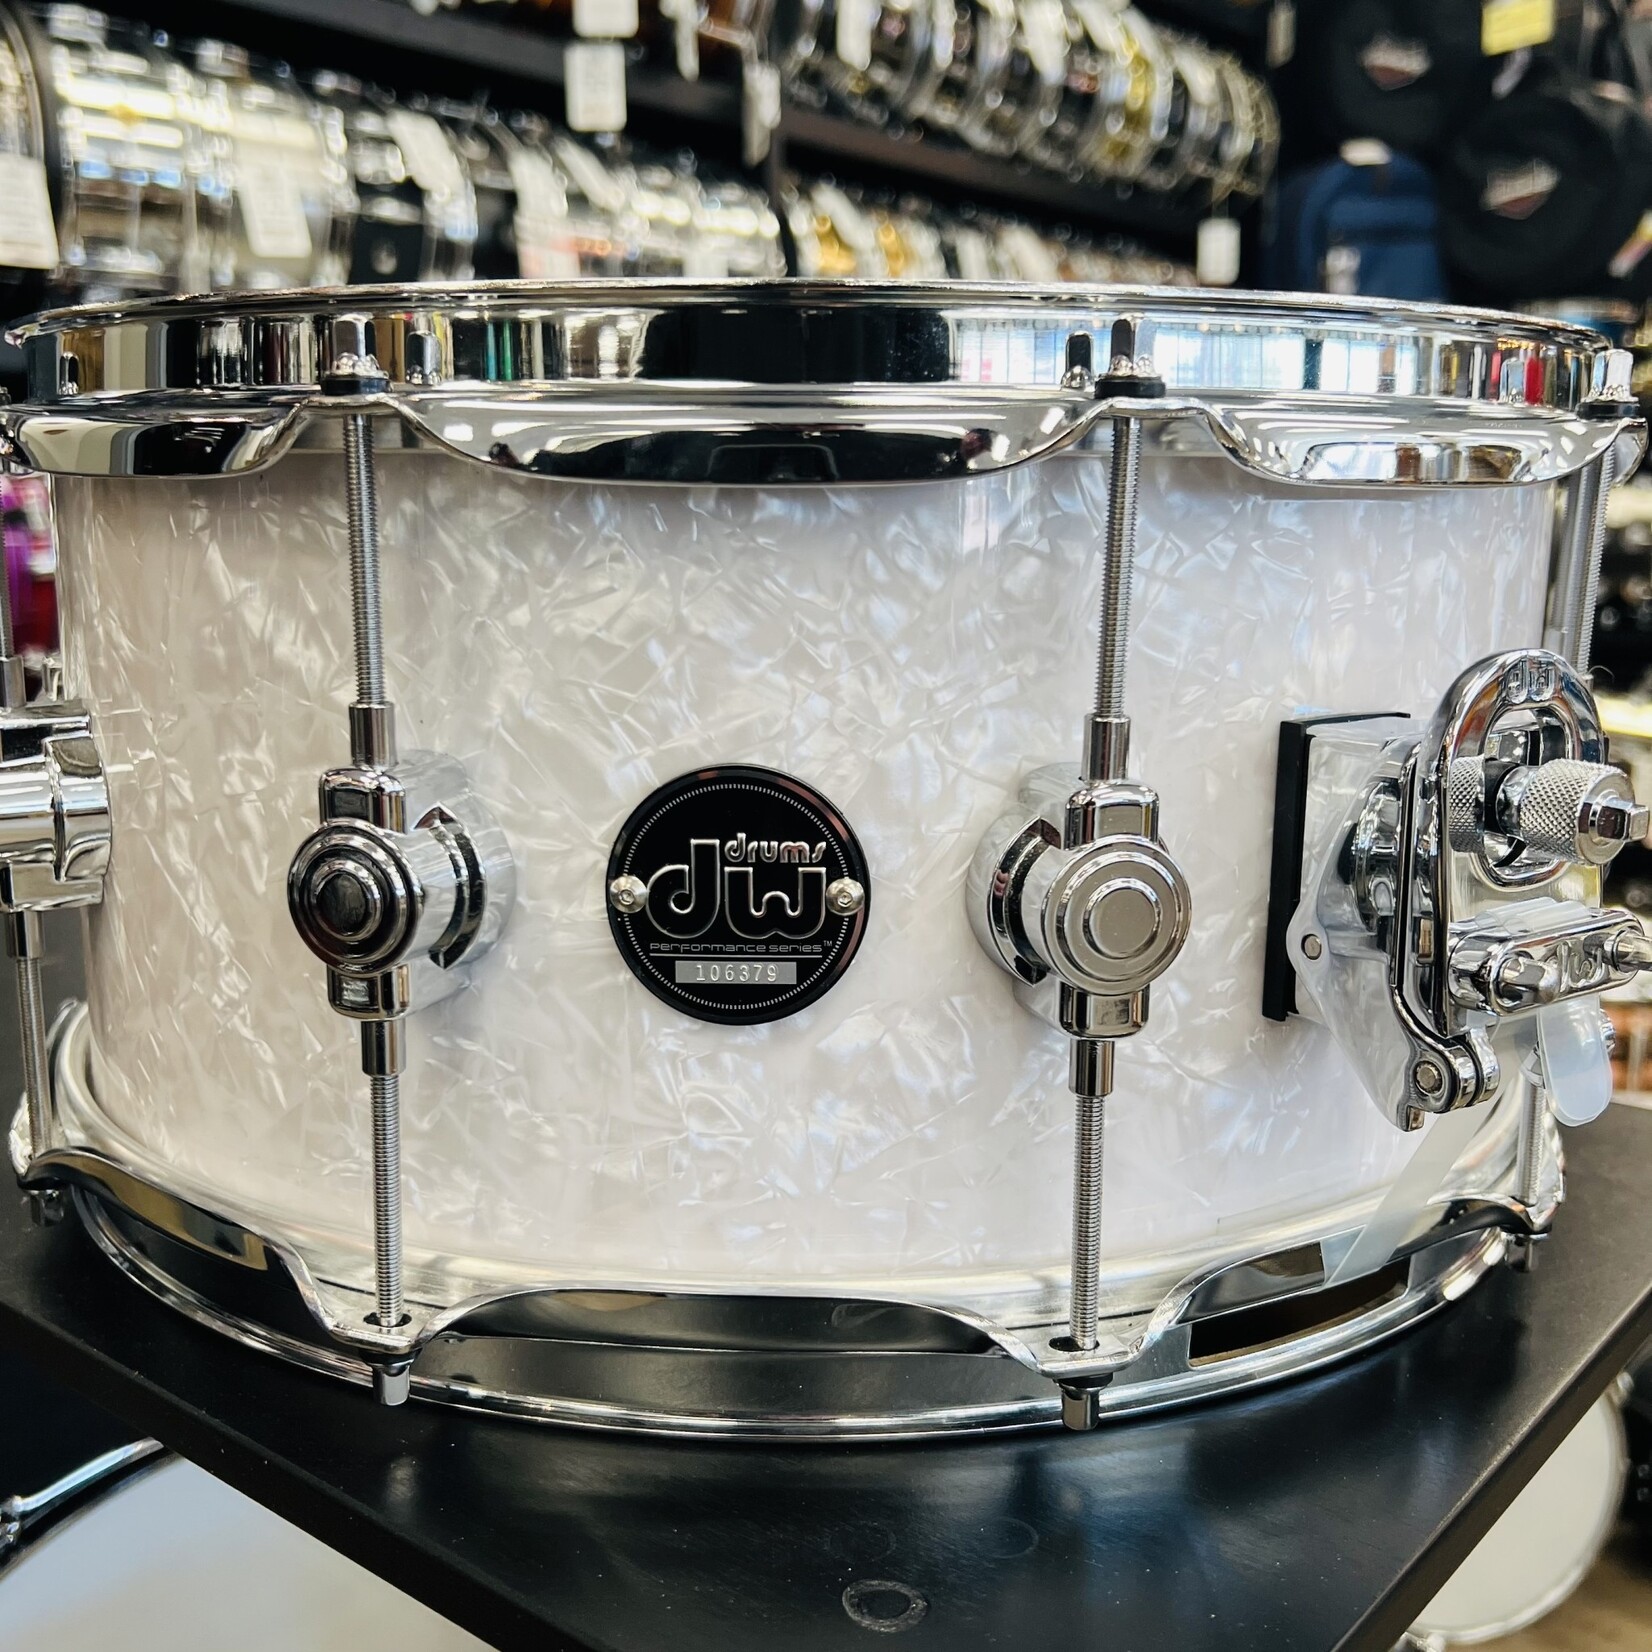 DW Used DW Performance 6.5x14 Snare Drum (White Marine)